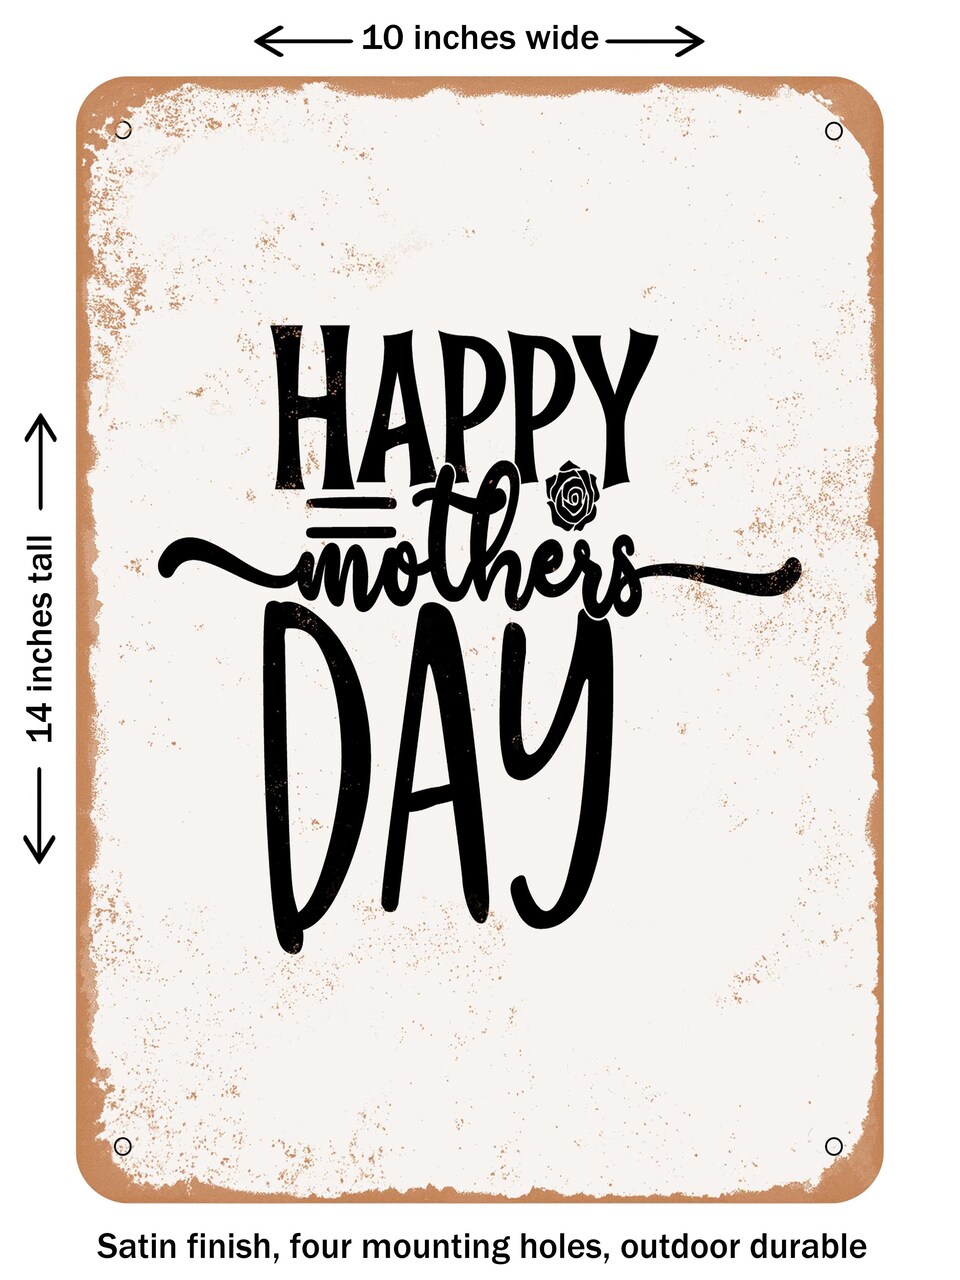 DECORATIVE METAL SIGN - Happy Mother&#x27;s Day  - Vintage Rusty Look